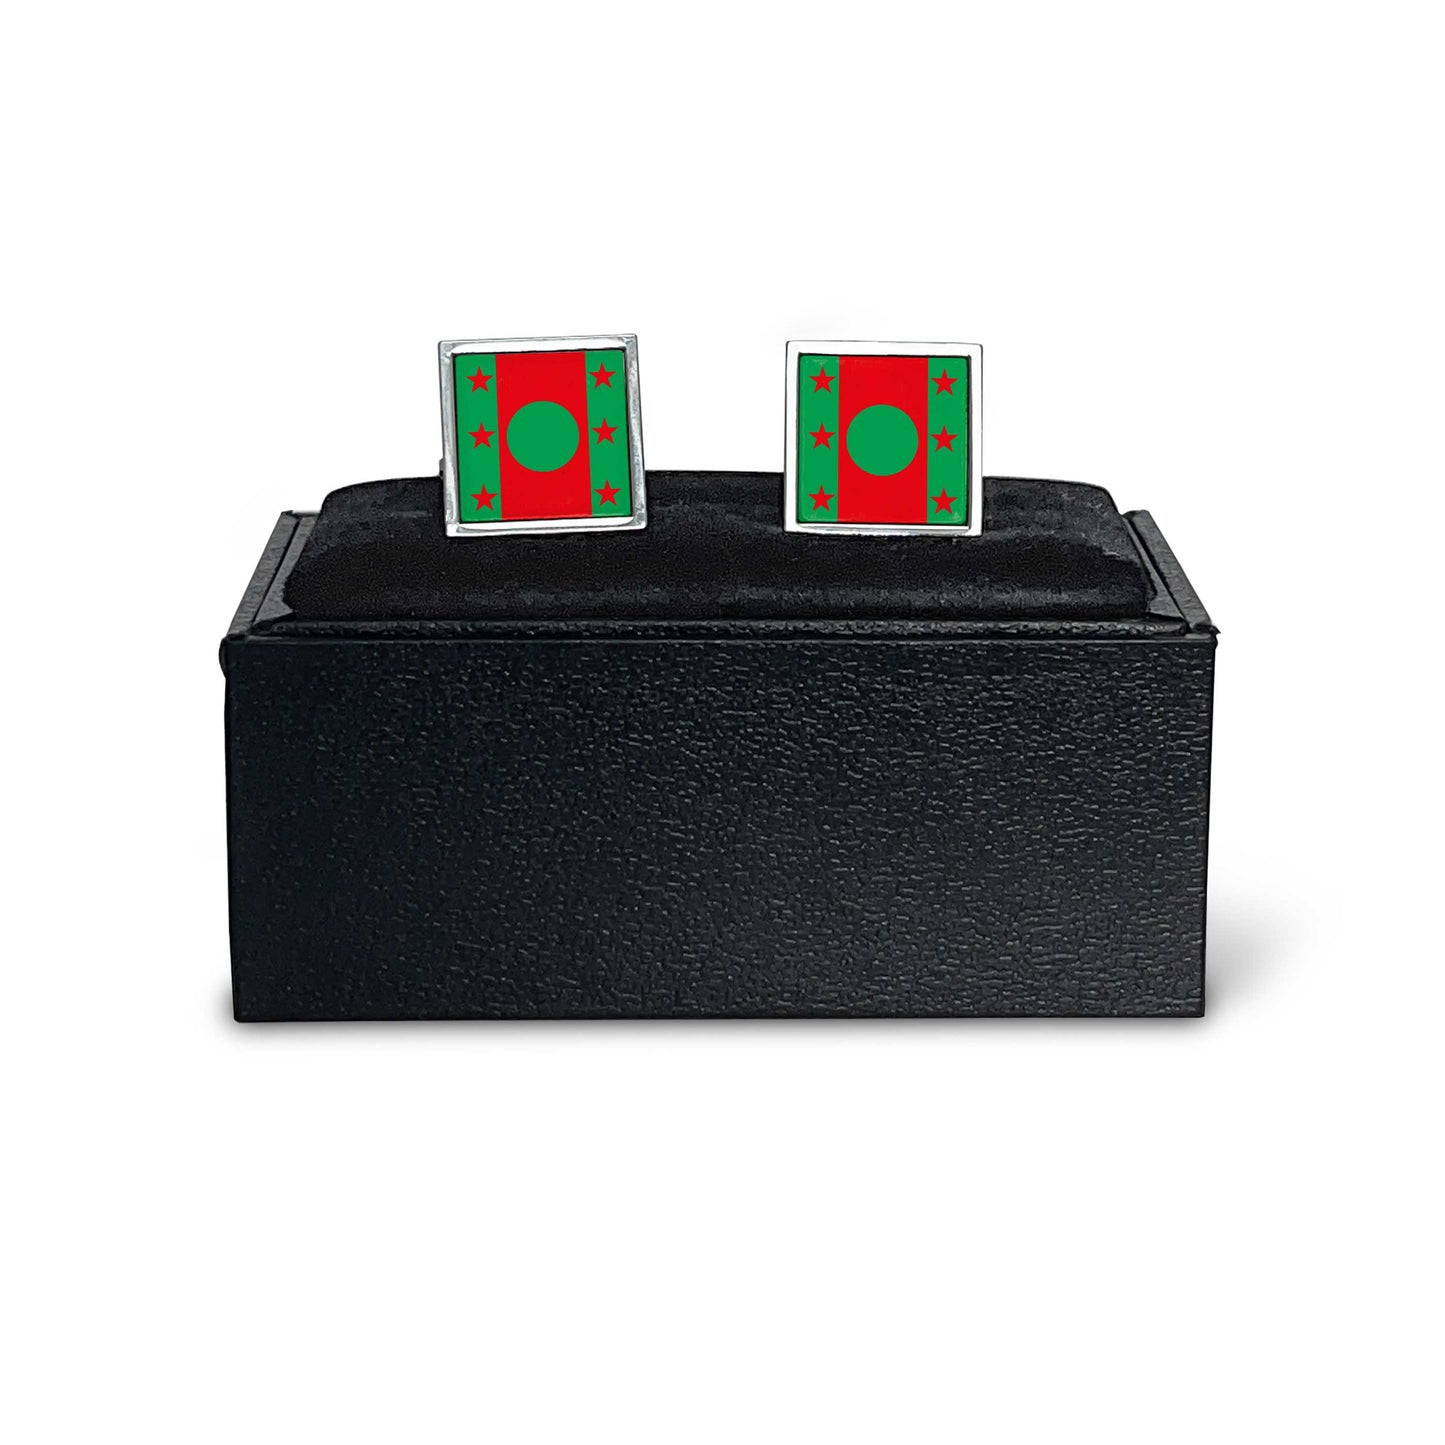 Masterson Holdings Limited Cufflinks - Cufflinks - Hacked Up